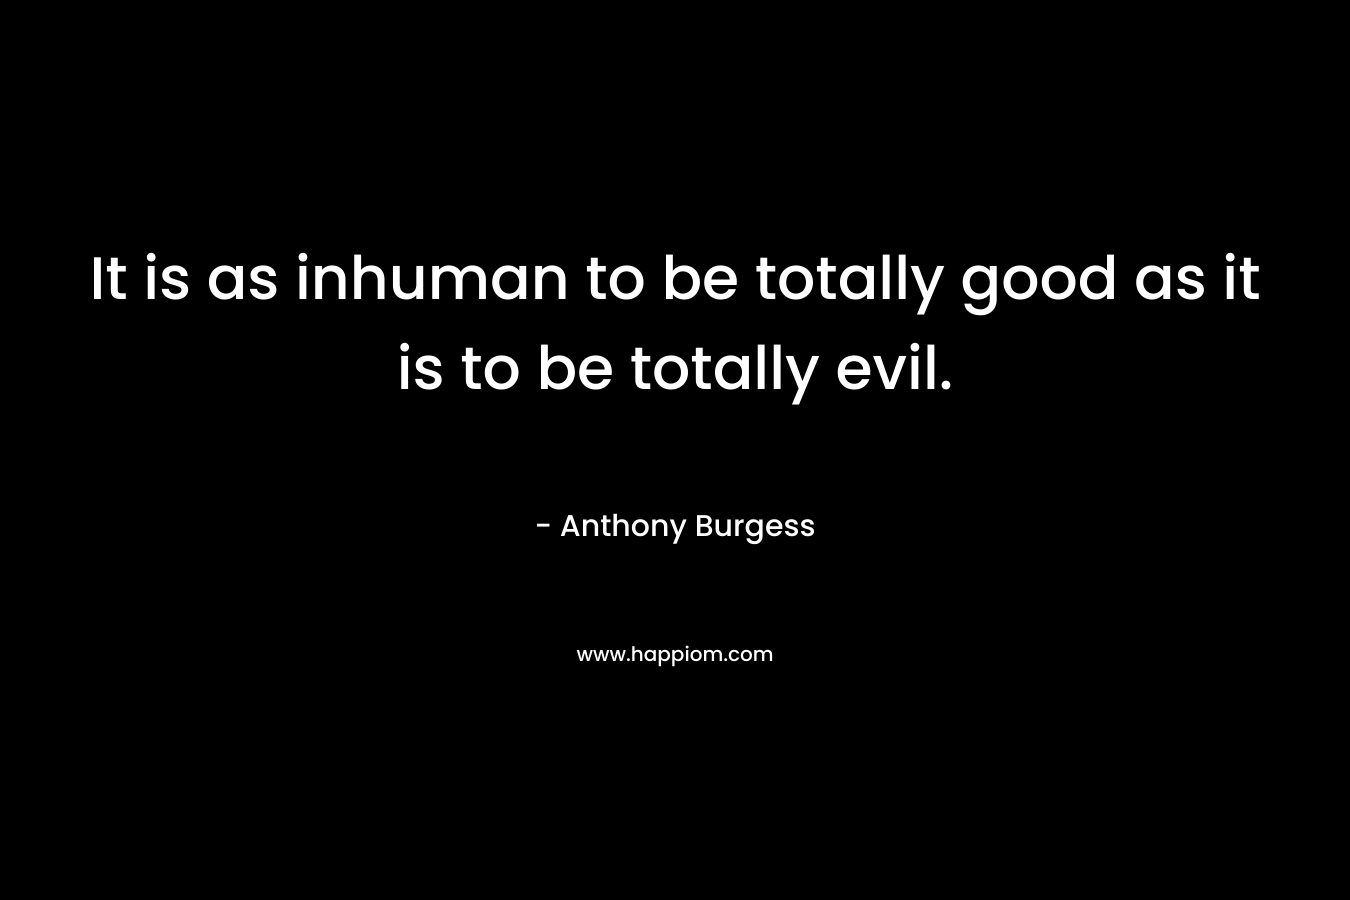 It is as inhuman to be totally good as it is to be totally evil. – Anthony Burgess